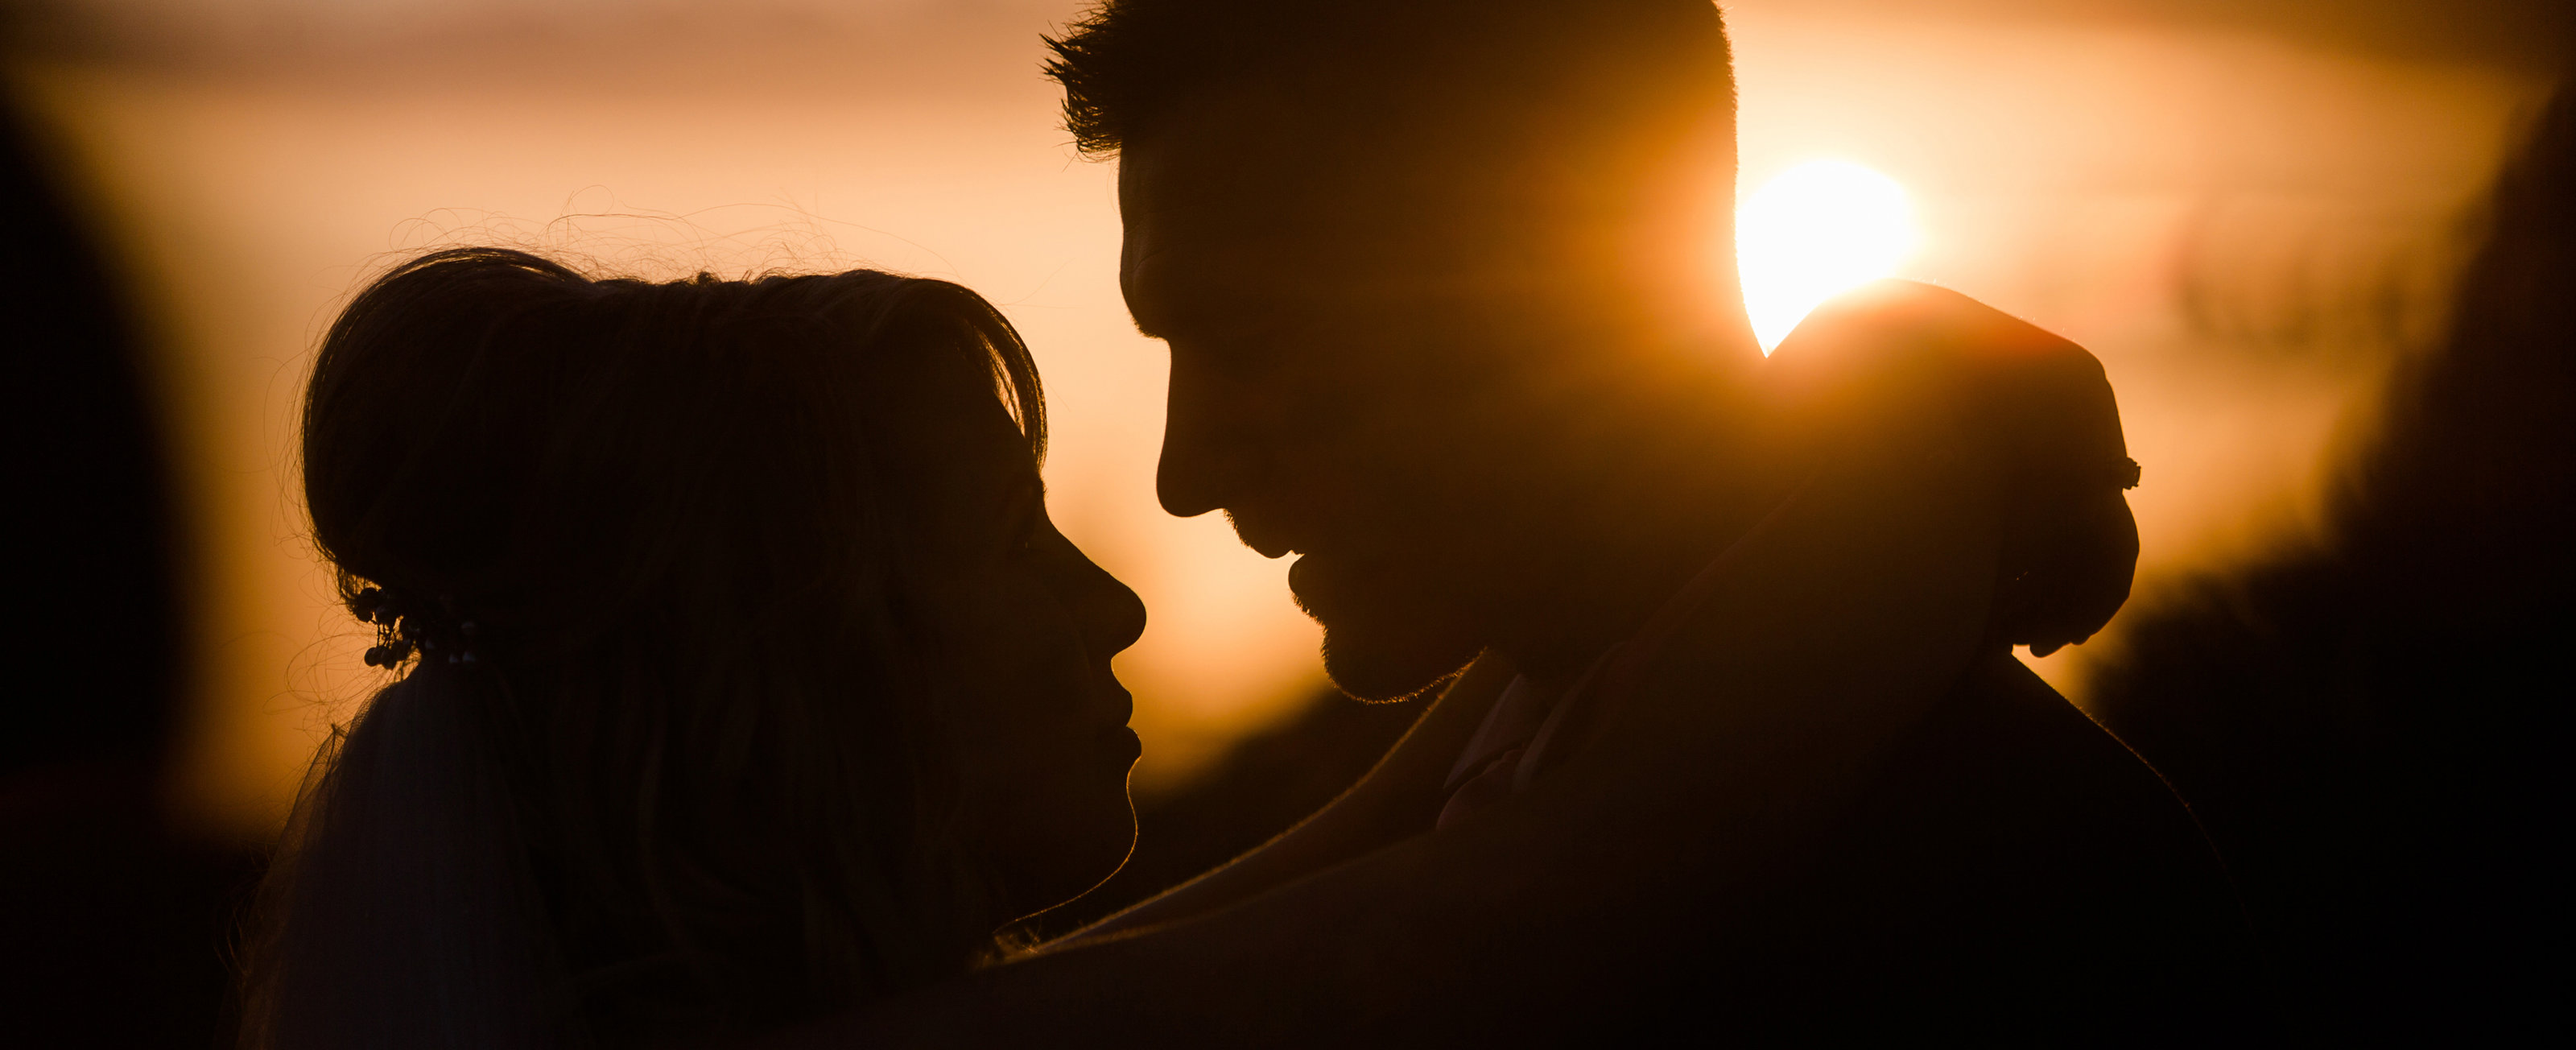 Taken by Adorlee at Golden Hour, this bride and groom have the perfect loving silhoutte embraced for the wedding portraits at sunset